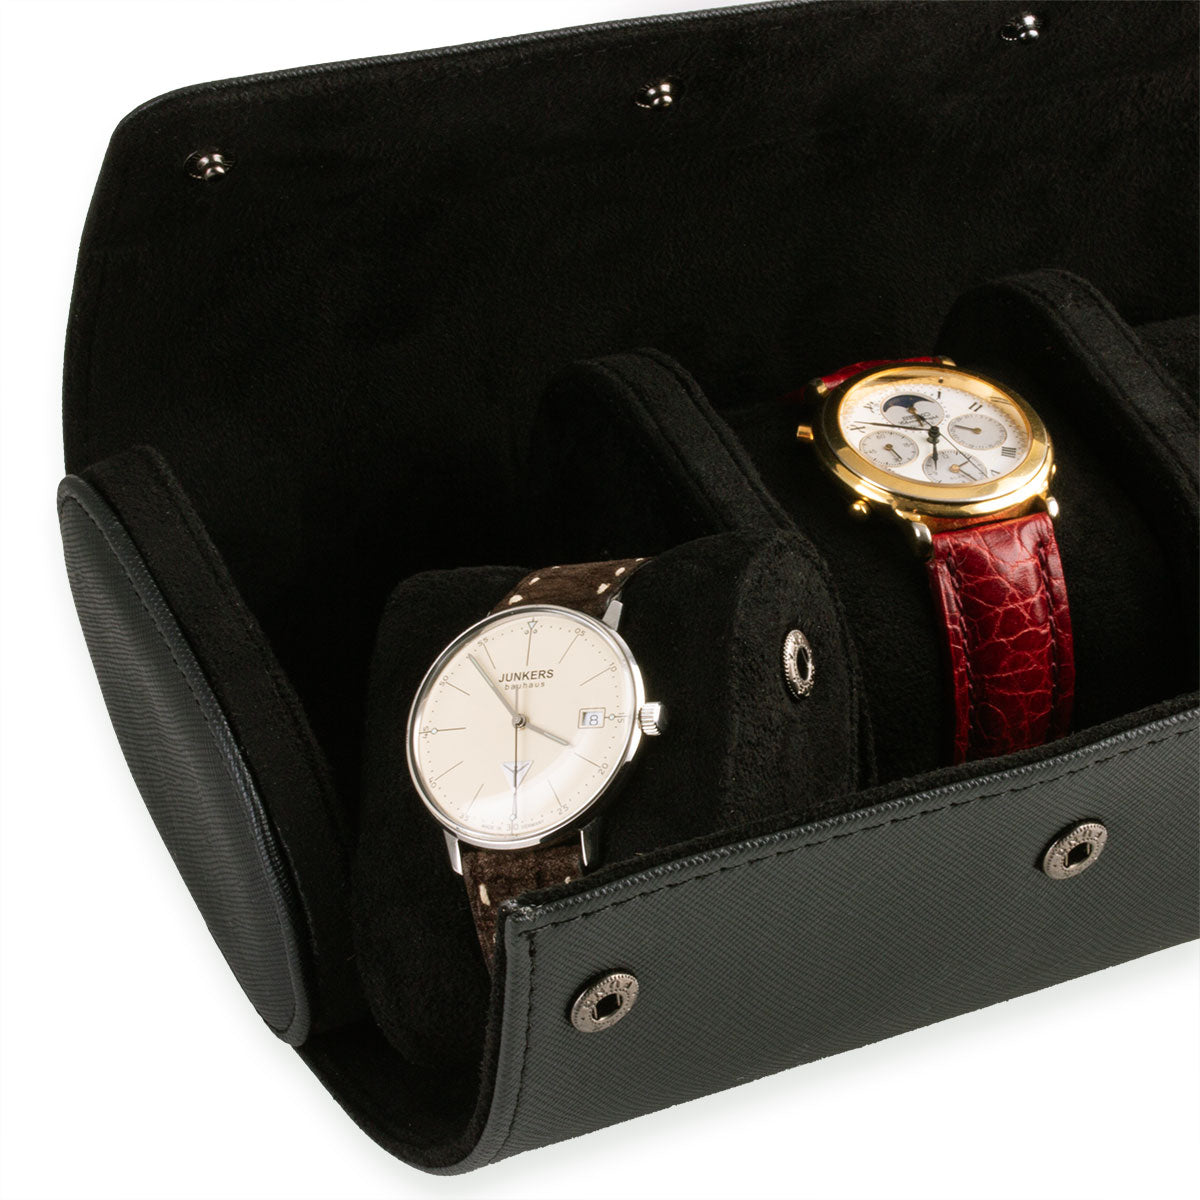 Travel case - Watch roll for 3 watches - Black, grey, blue, brown